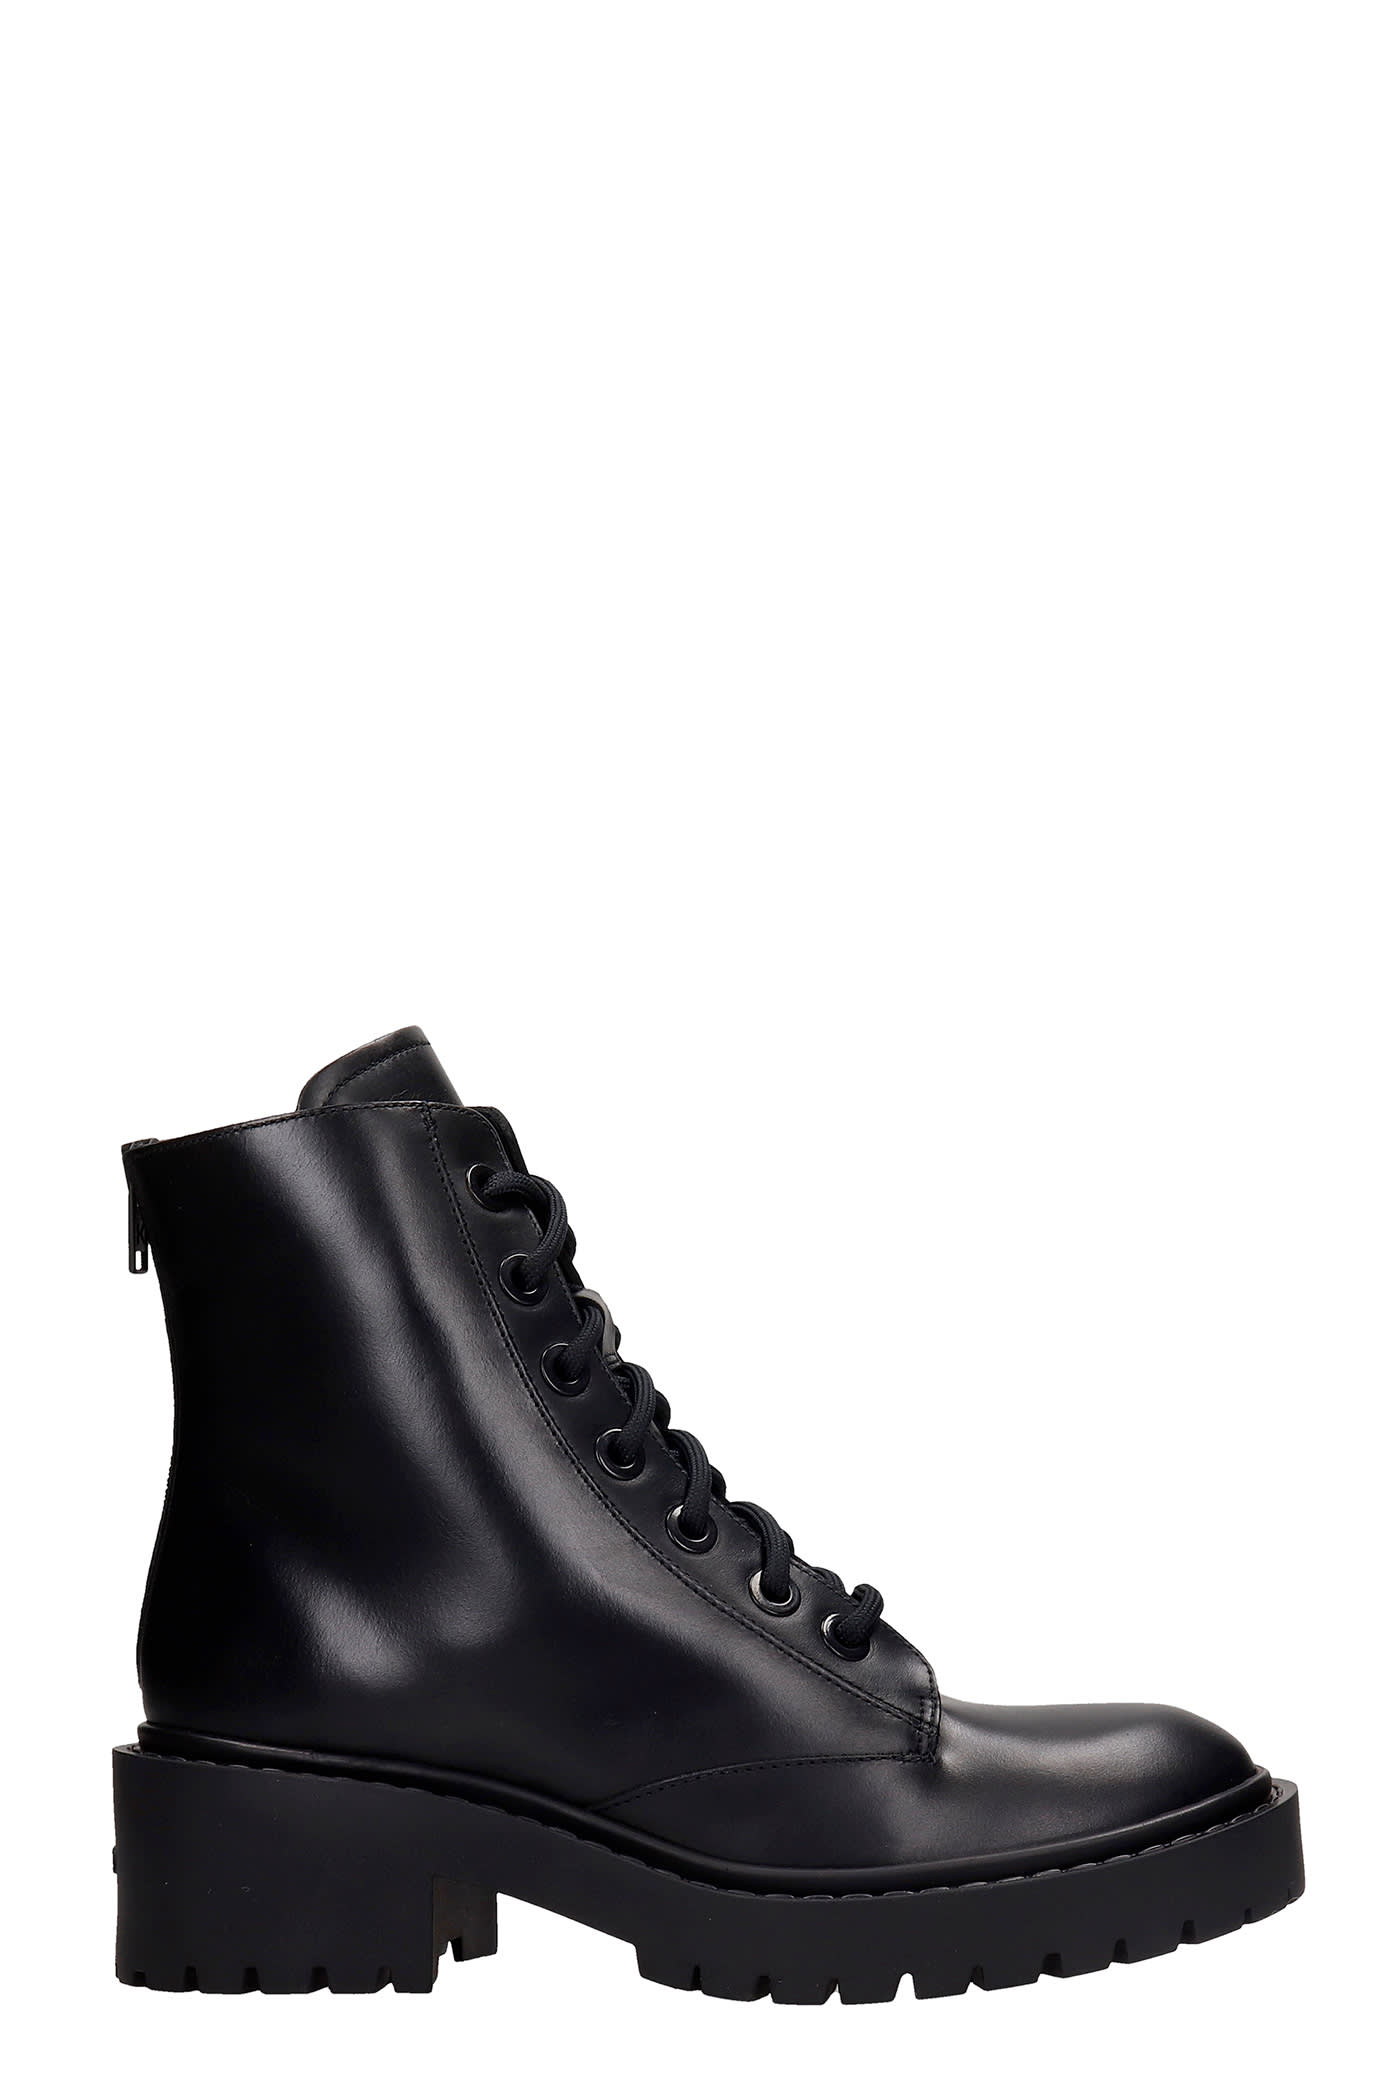 Buy Kenzo Combat Boots In Black Leather online, shop Kenzo shoes with free shipping